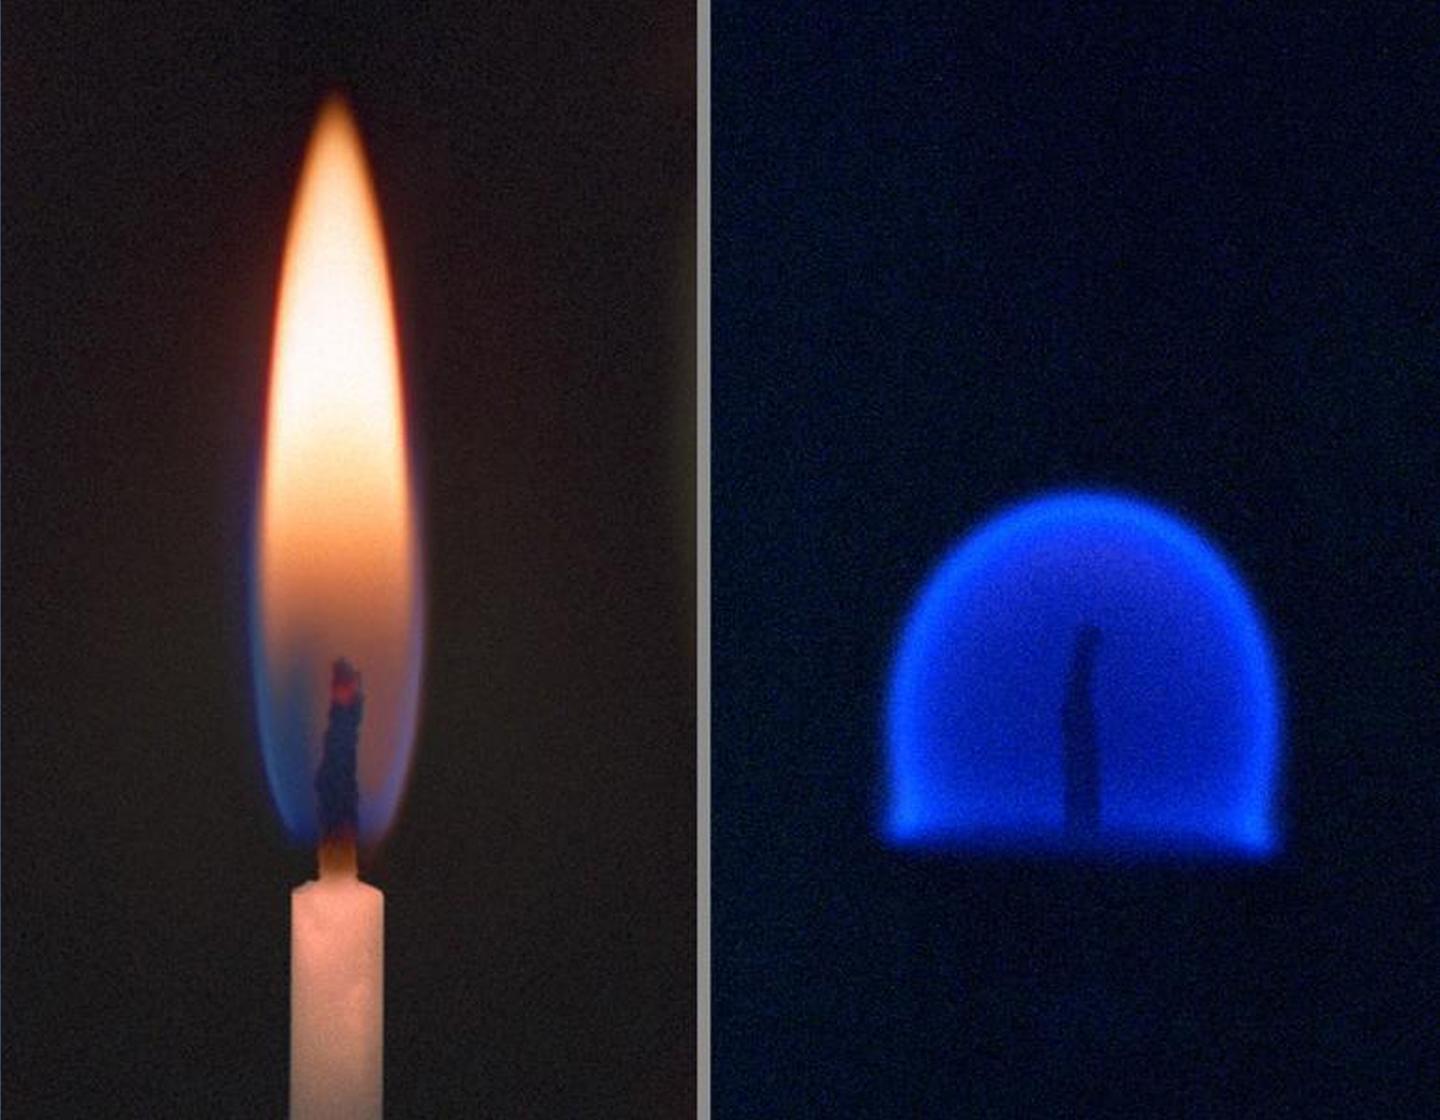 Difference Between a Flame in Gravity and Microgravity